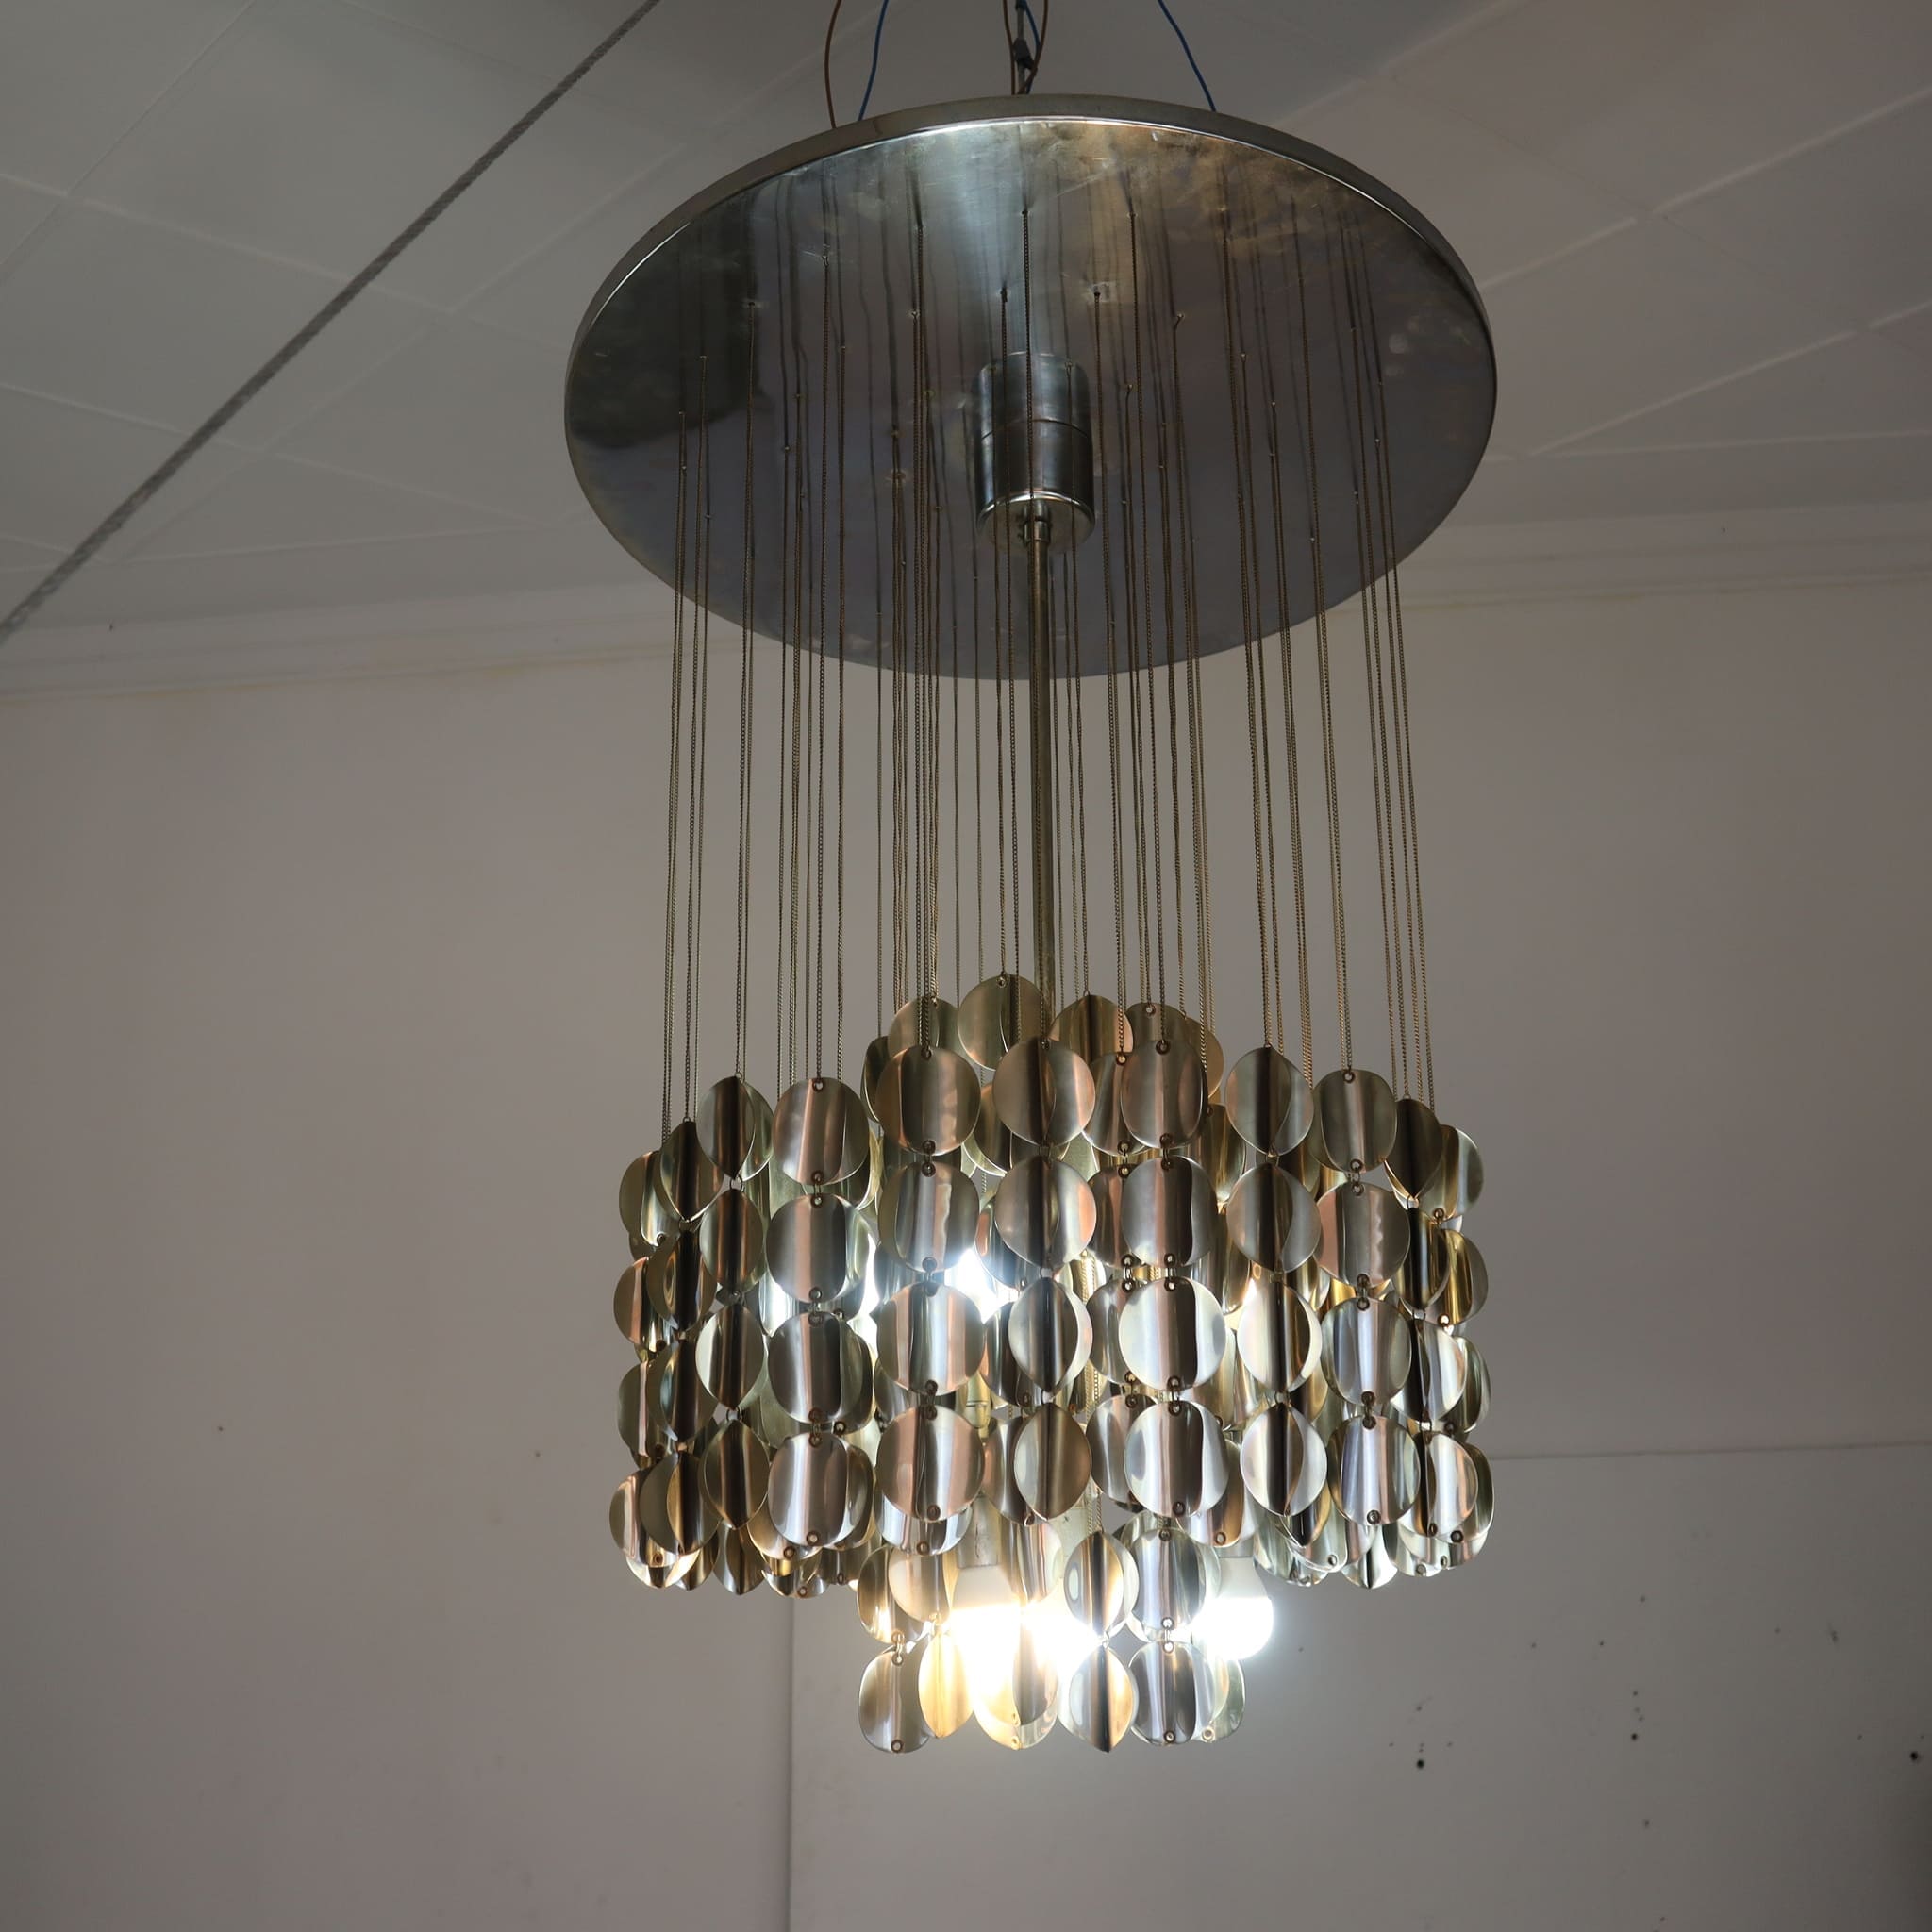 visionidepoca-modern-art-chandelier-with-steel-pendants-70s-frontal-view-detail-on